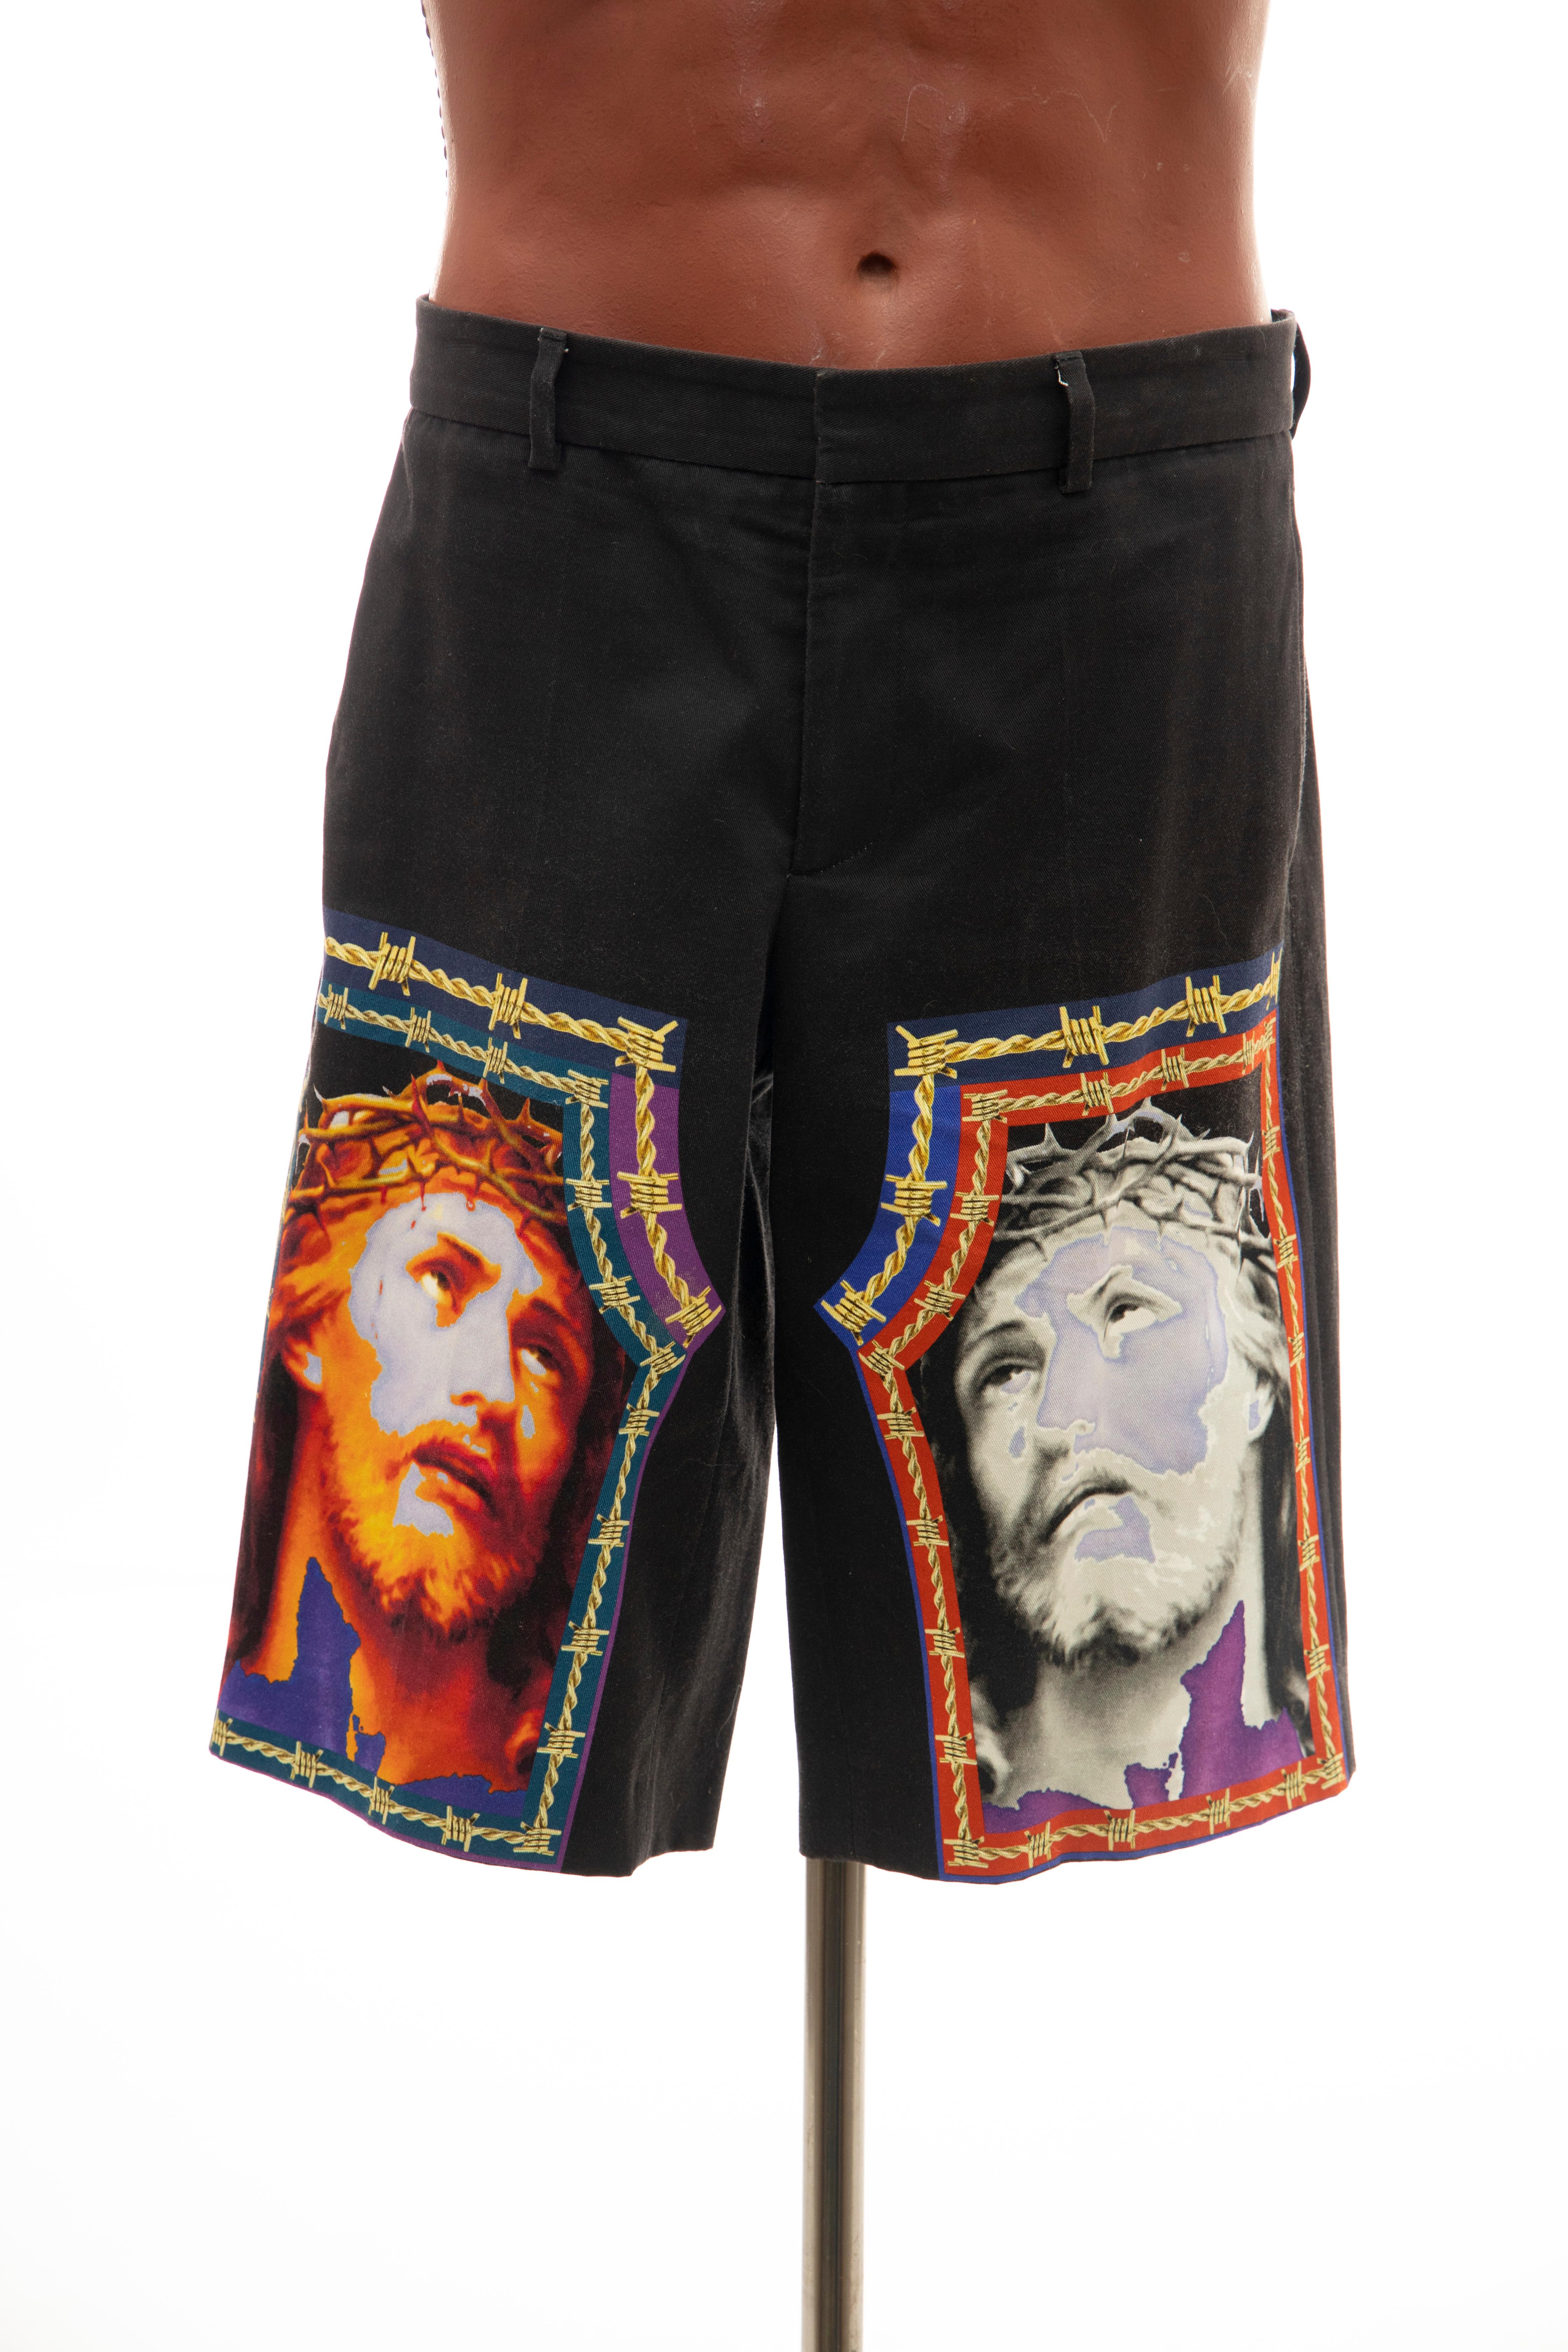 Riccardo Tisci for Givenchy Runway, Spring 2016 men's black printed cotton shorts, two front pockets, zip front and hook-and-eye closure.

EU. 50

Waist: 34, Length: 23